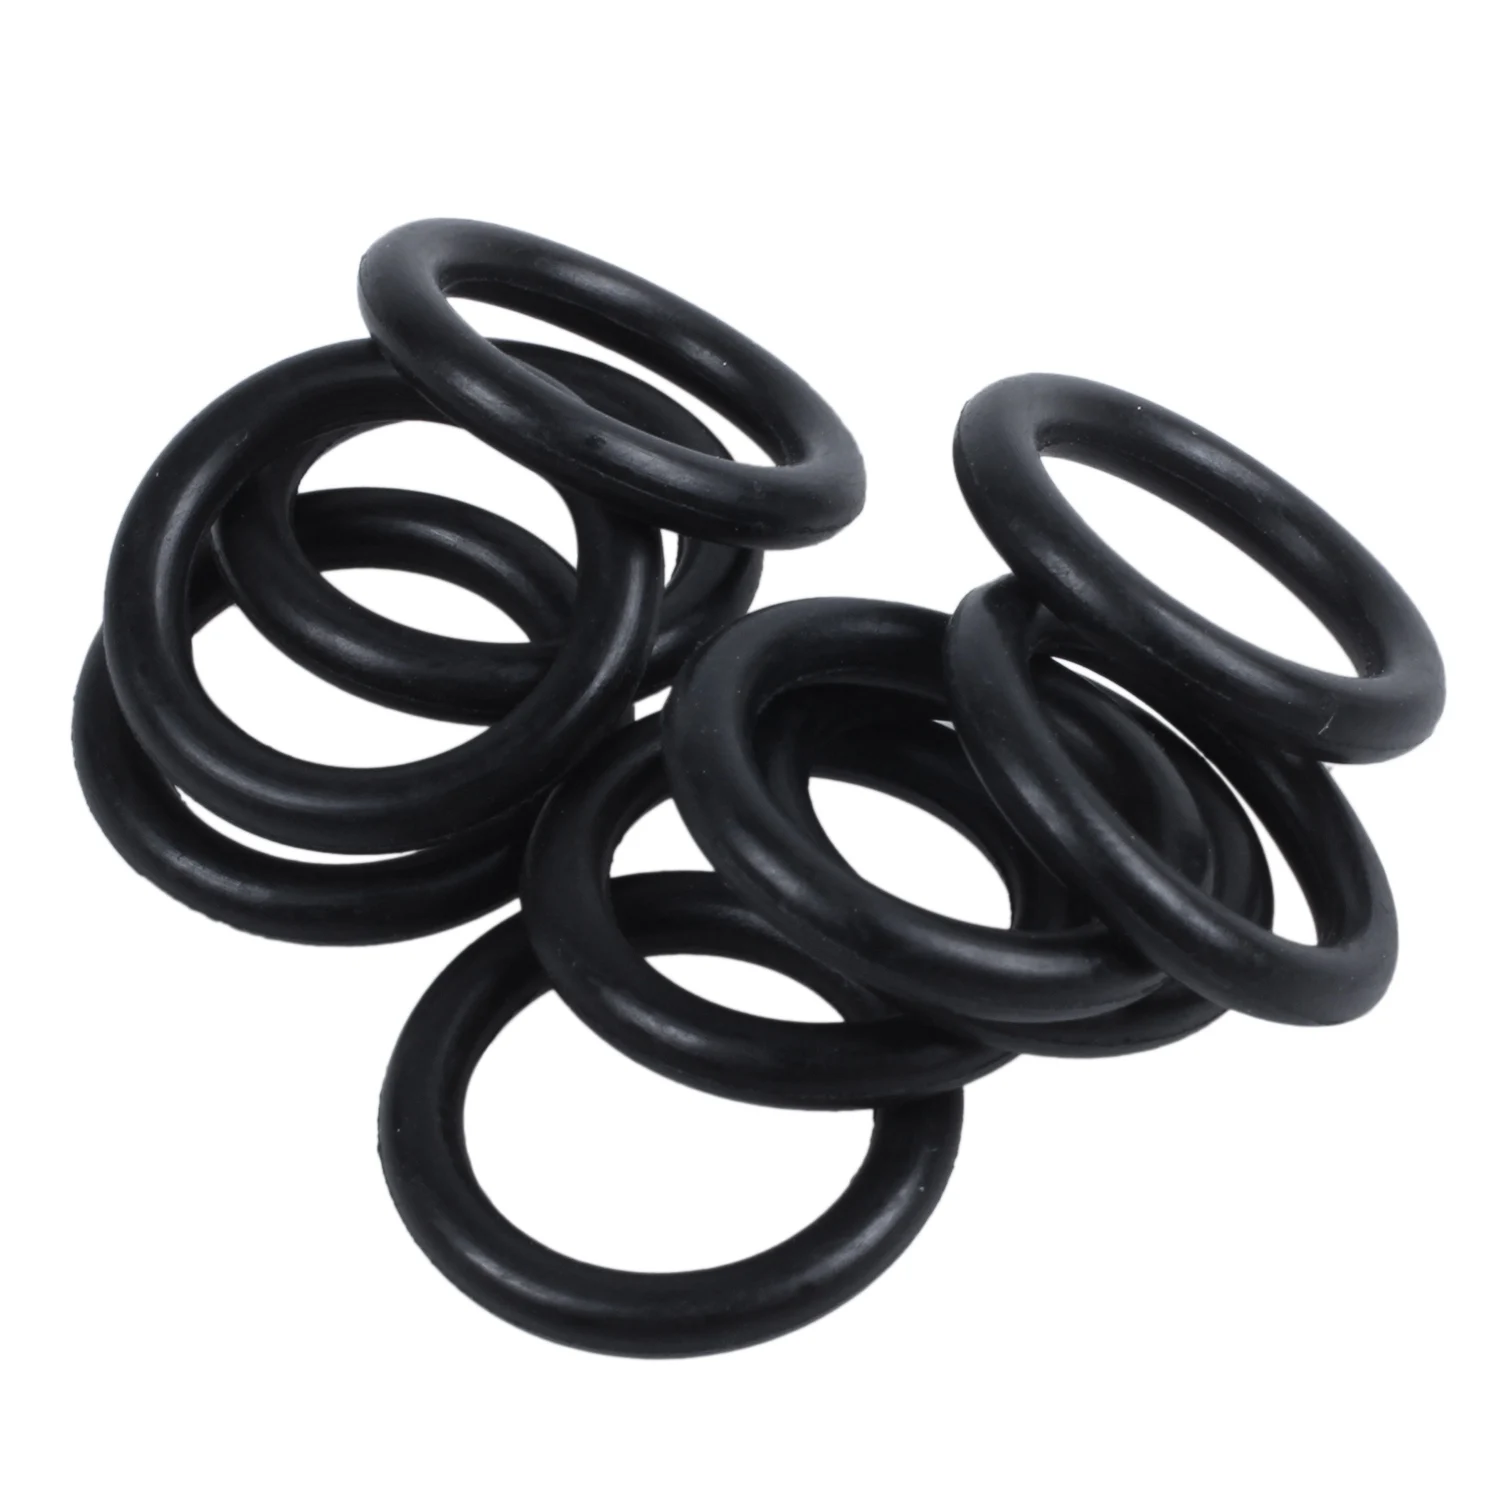 

10 pcs Black Rubber Oil Seal O-rings Seals washers 16 x 11 x 2.5mm